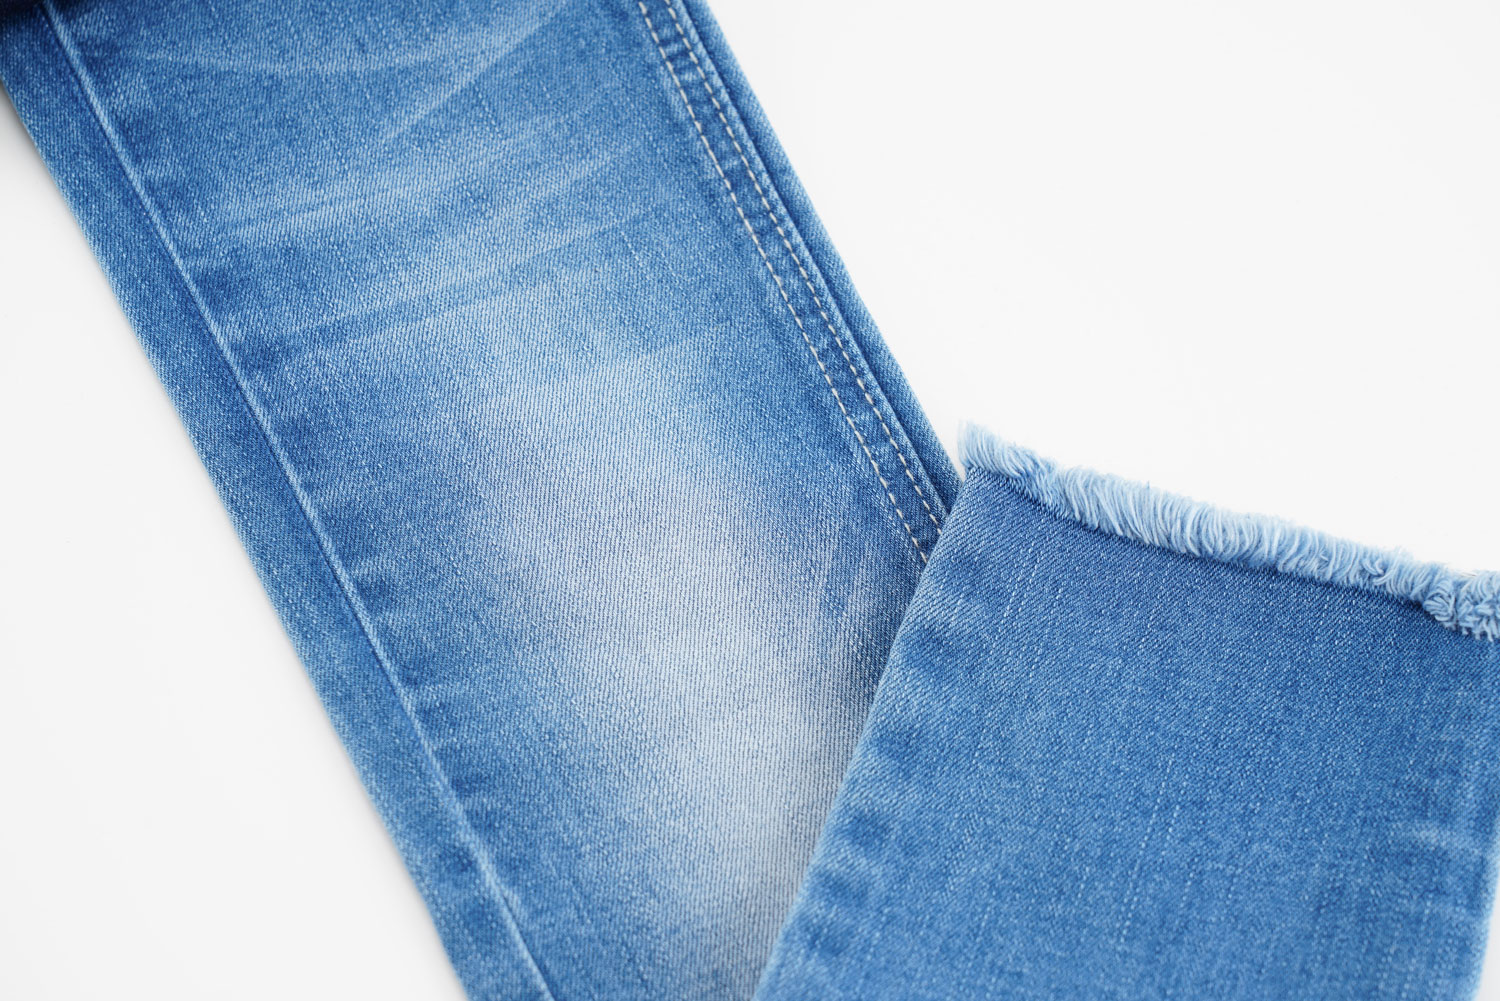 How You Can Make Money on Comfort Stretch Denim Products 2